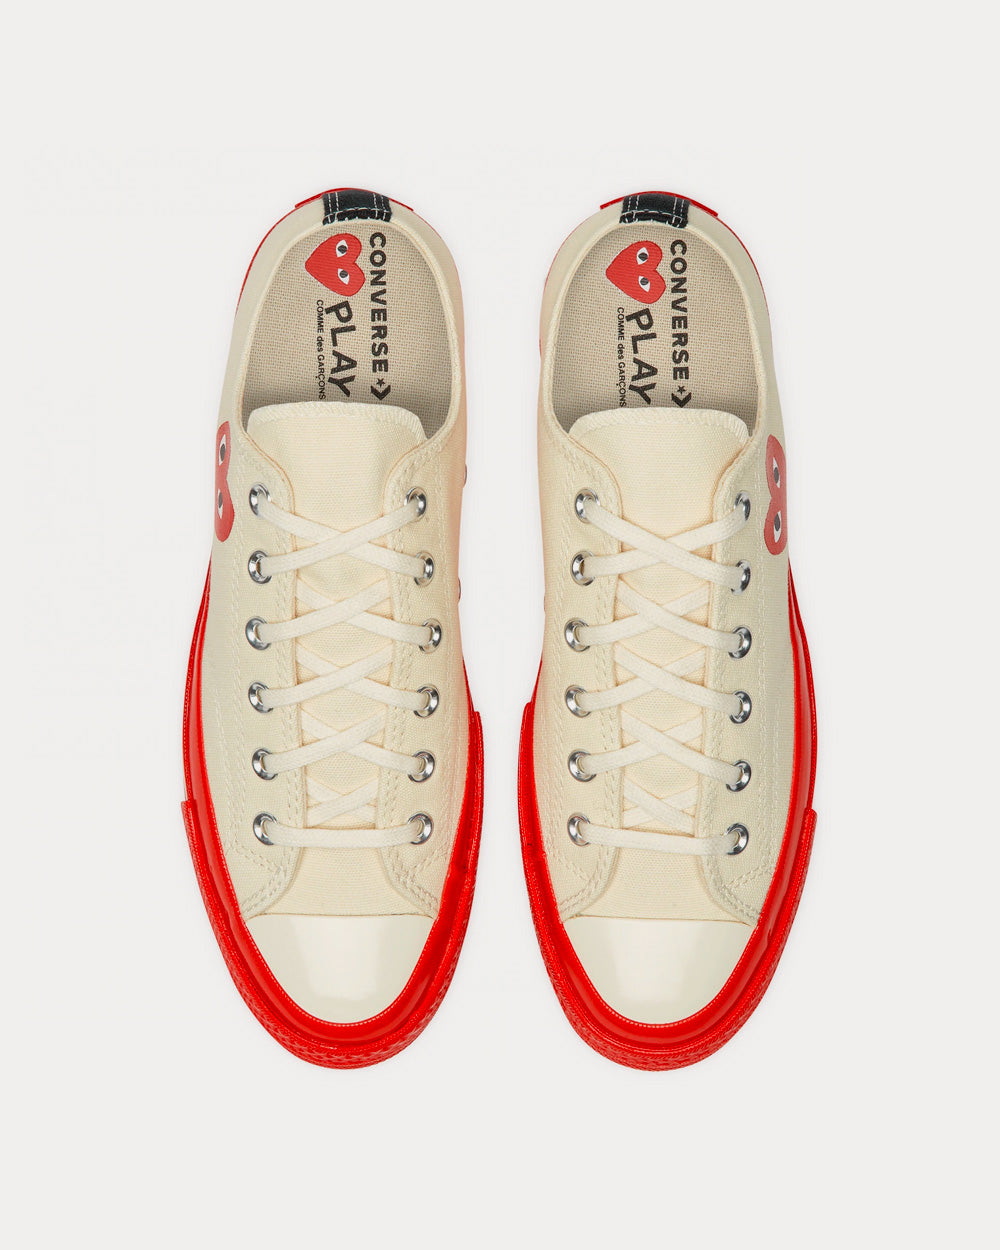 Converse x Comme des Garçons PLAY - Chuck 70 White / Red Low Top Sneakers